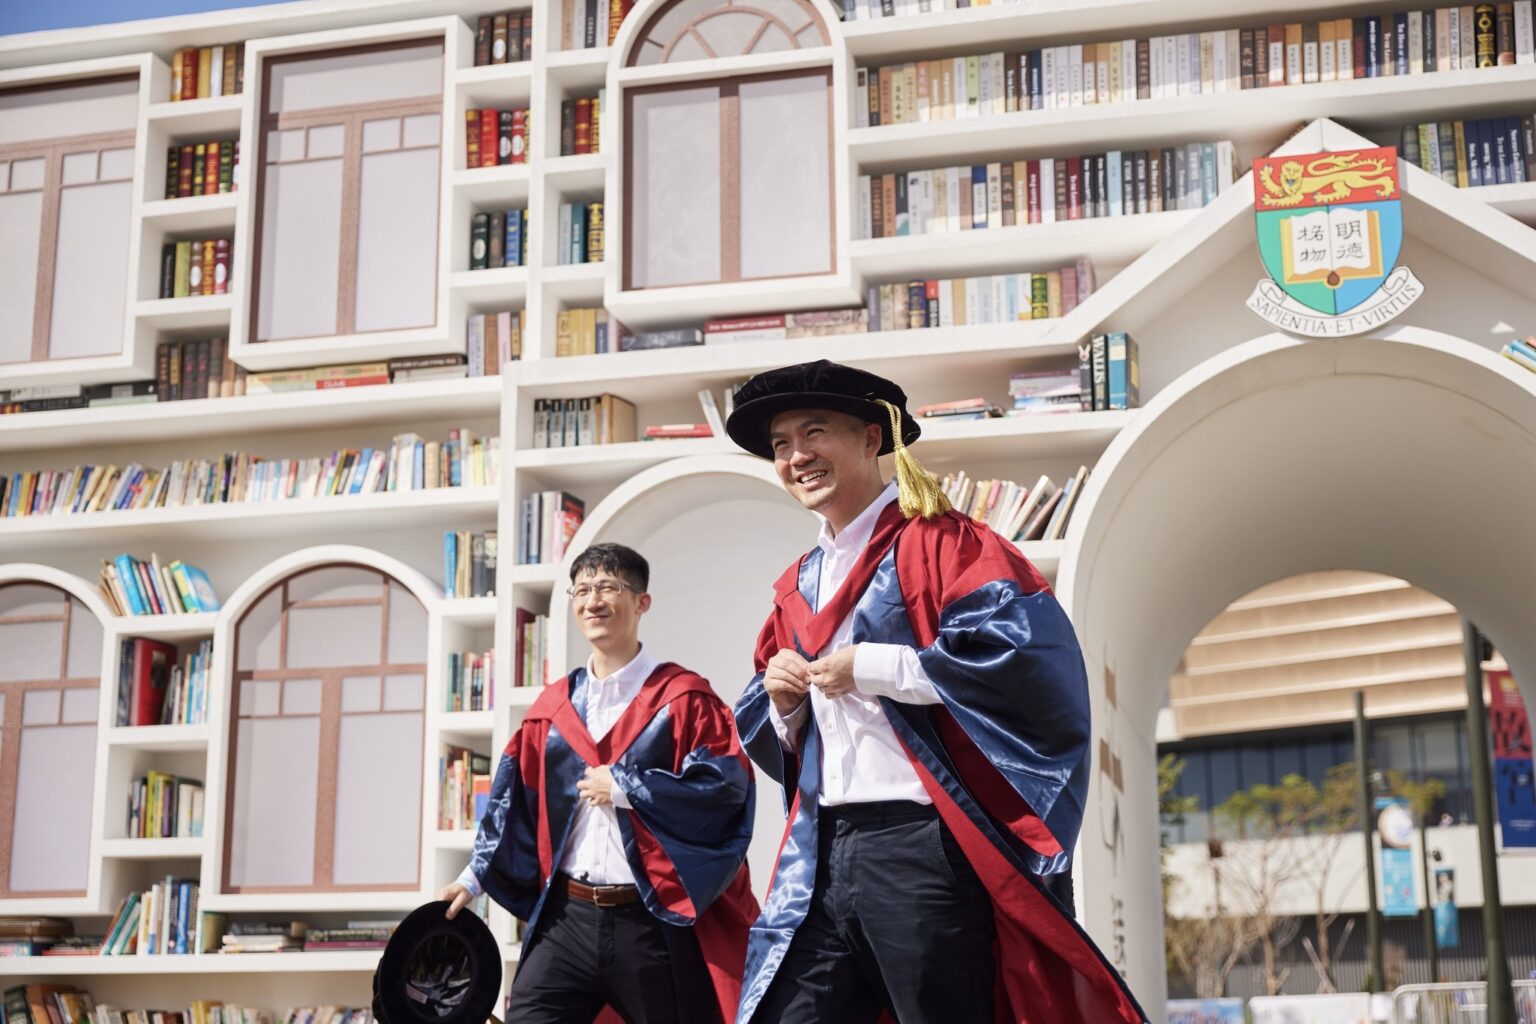 Two students wearing graduation gowns in front of university bookshelves lined with books.